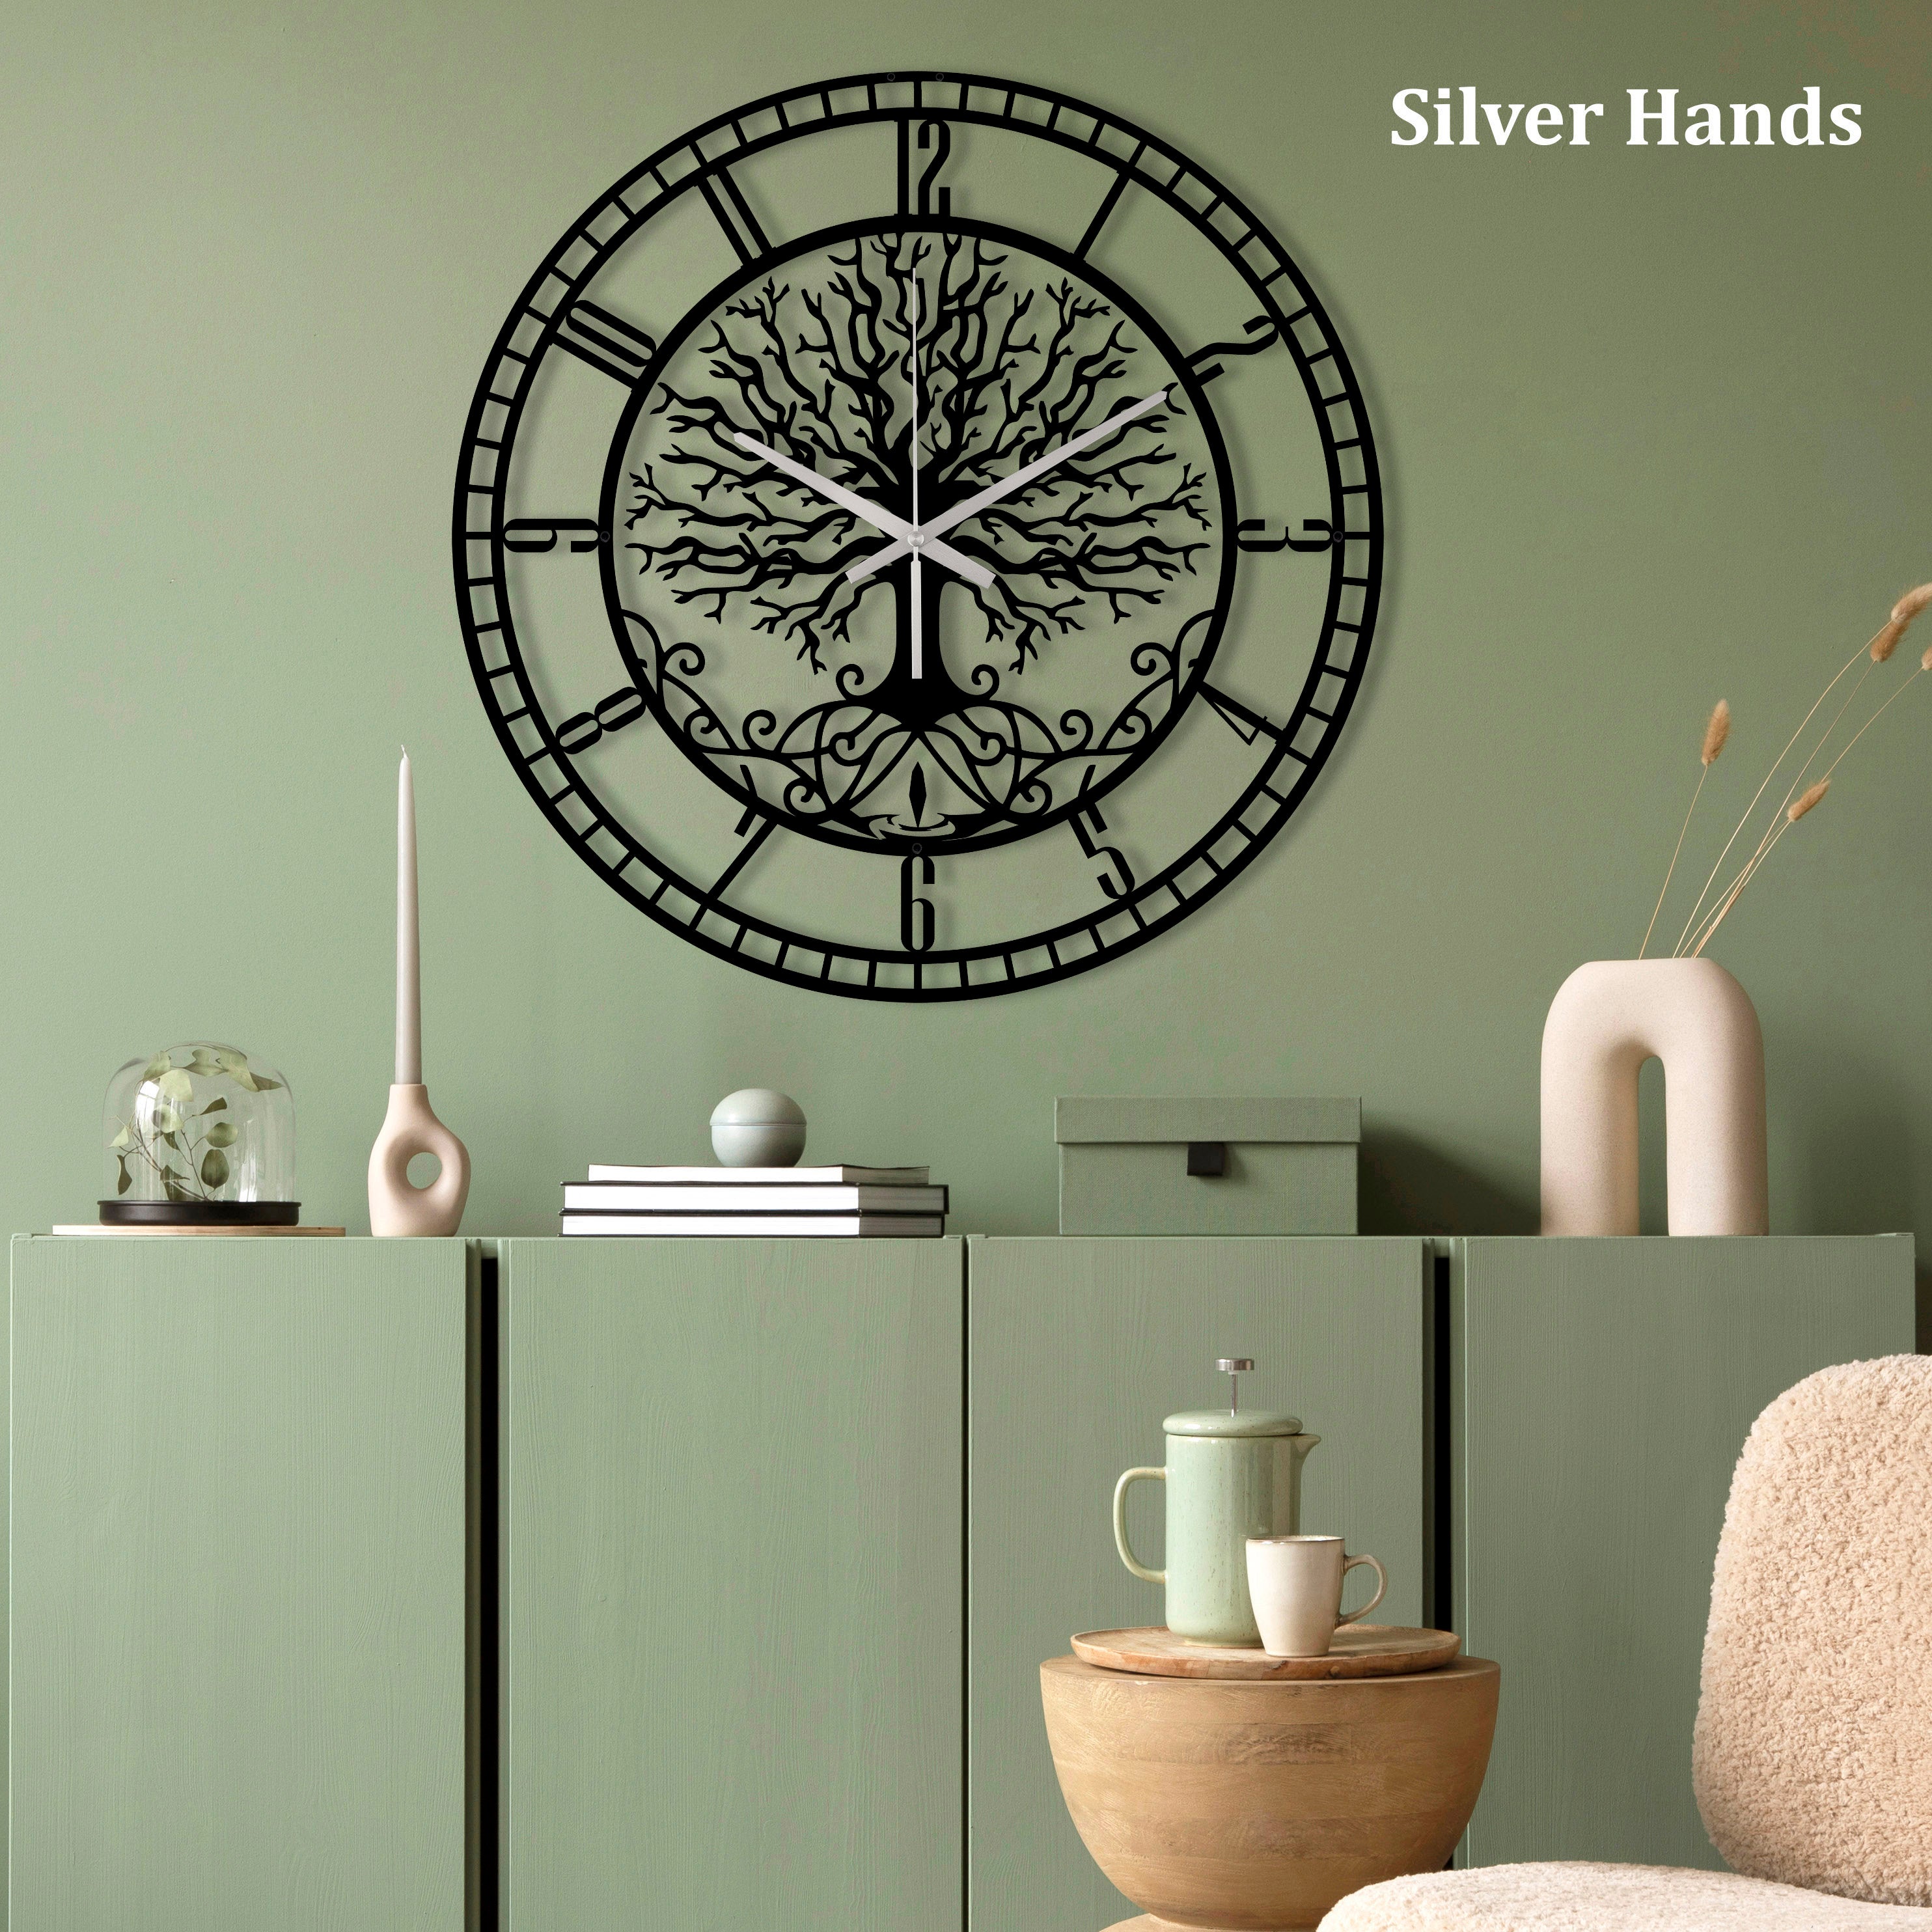 Large Tree Of Life Clock, Metal Wall Clock, Unique Wall Clock, Oversized Wall Clock, Living Room Wall Clocks With Numbers, Clocks For Wall